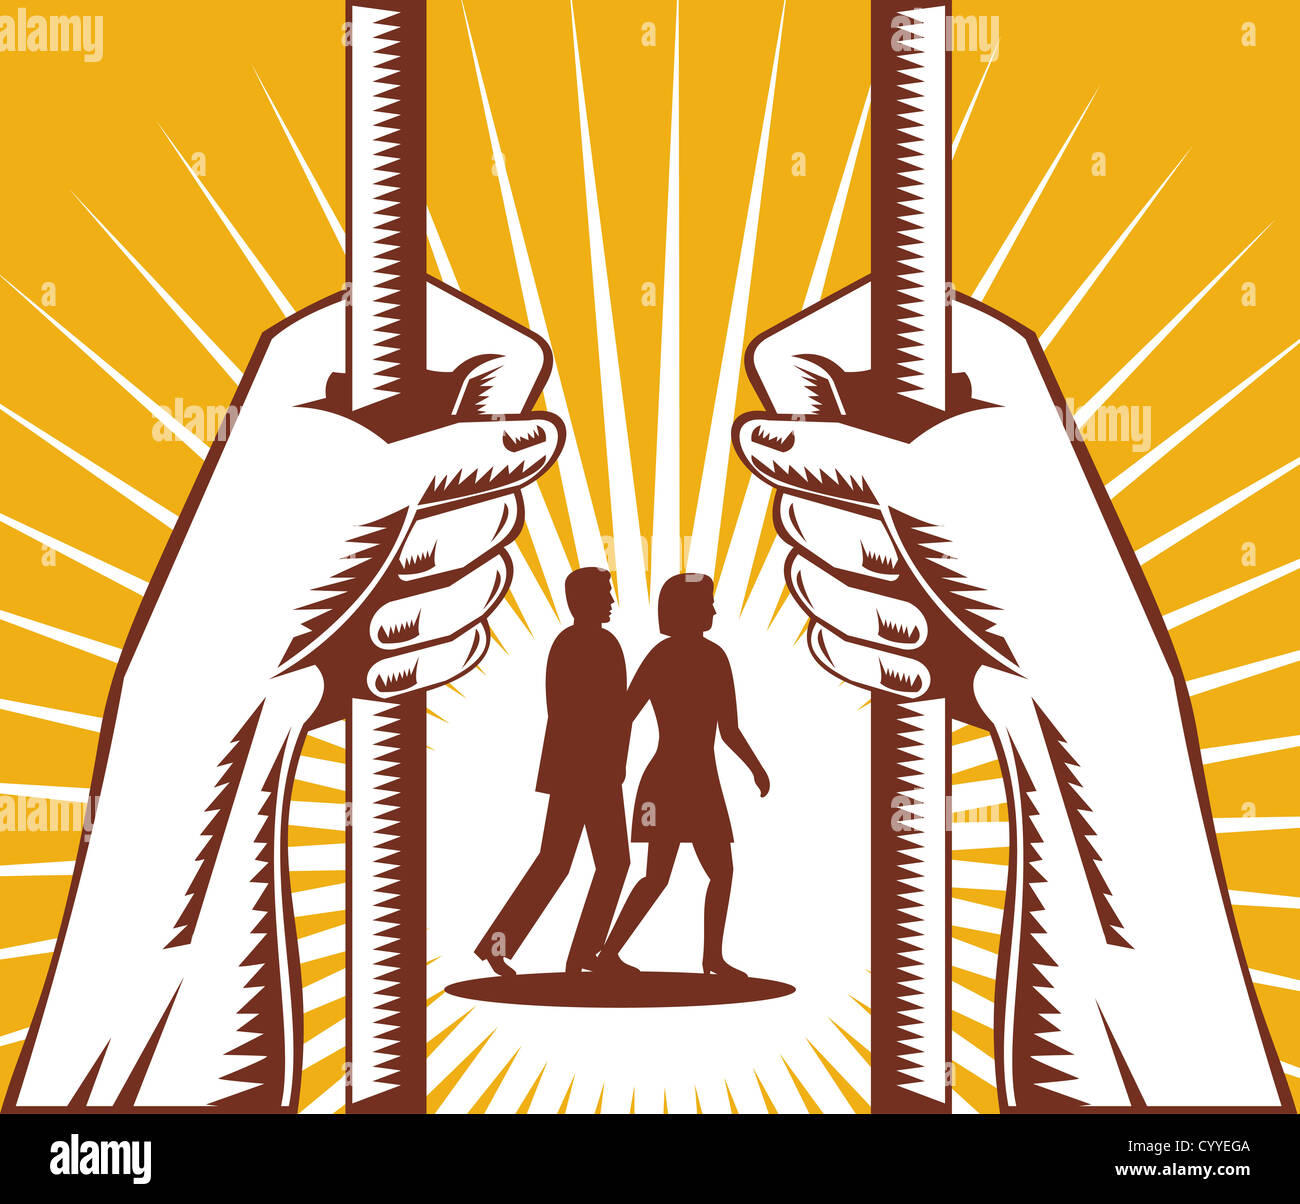 Illustration of pair of hands inside prison cell bar looking at couple lovers walking retro woodcut style. Stock Photo